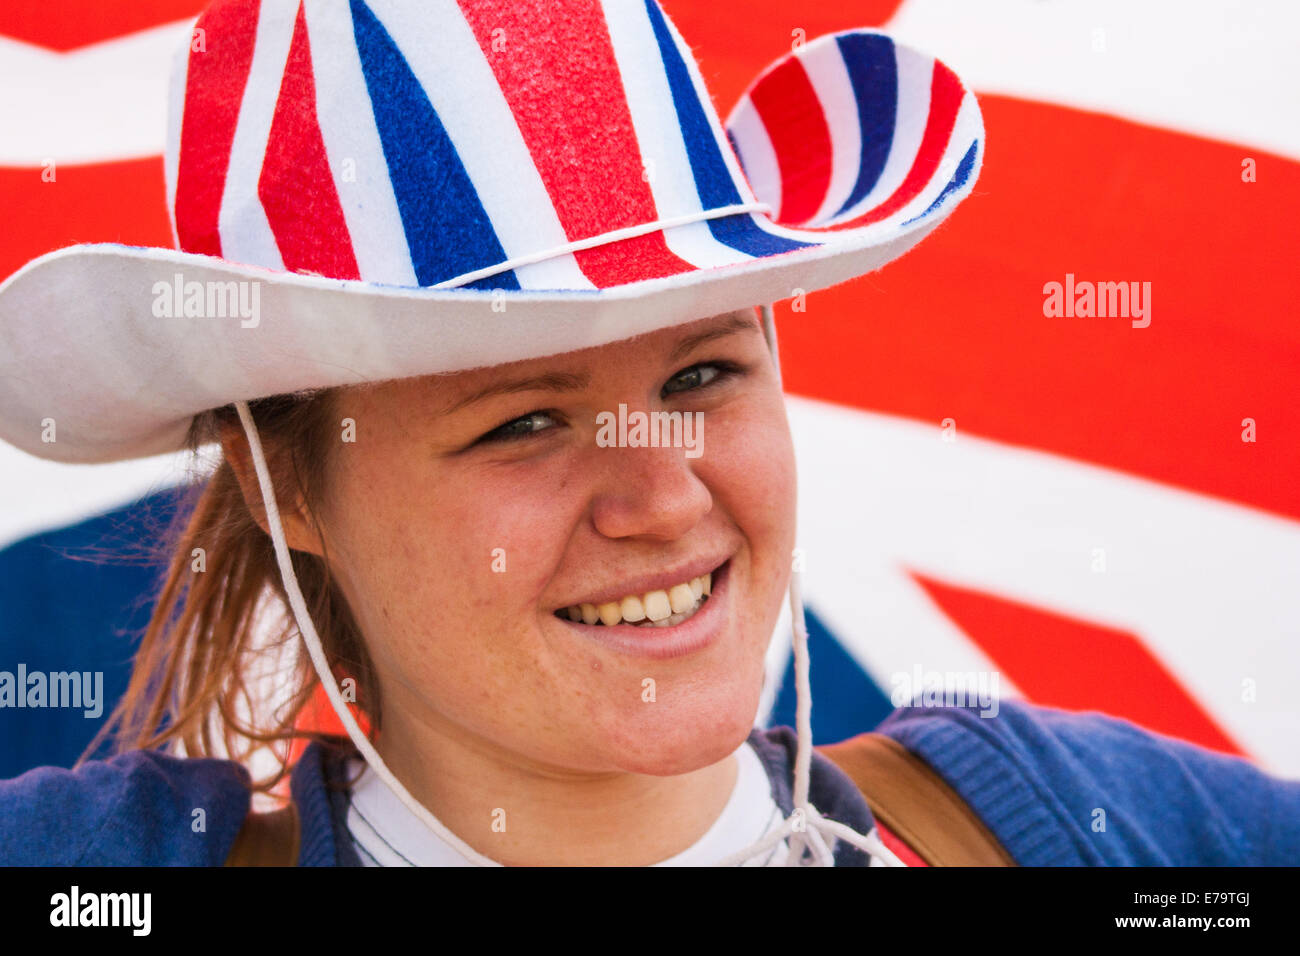 Queen Elizabeth Olympic Park, London, UK. 10th Sep, 2014. Patriotic Liv McCarron queues to get into the opening ceremony for the Invictus Games, where over 400 competitors from 13 nations will take part in an international sporting event for wounded, injured and sick Servicemen and women. Credit:  Paul Davey/Alamy Live News Stock Photo